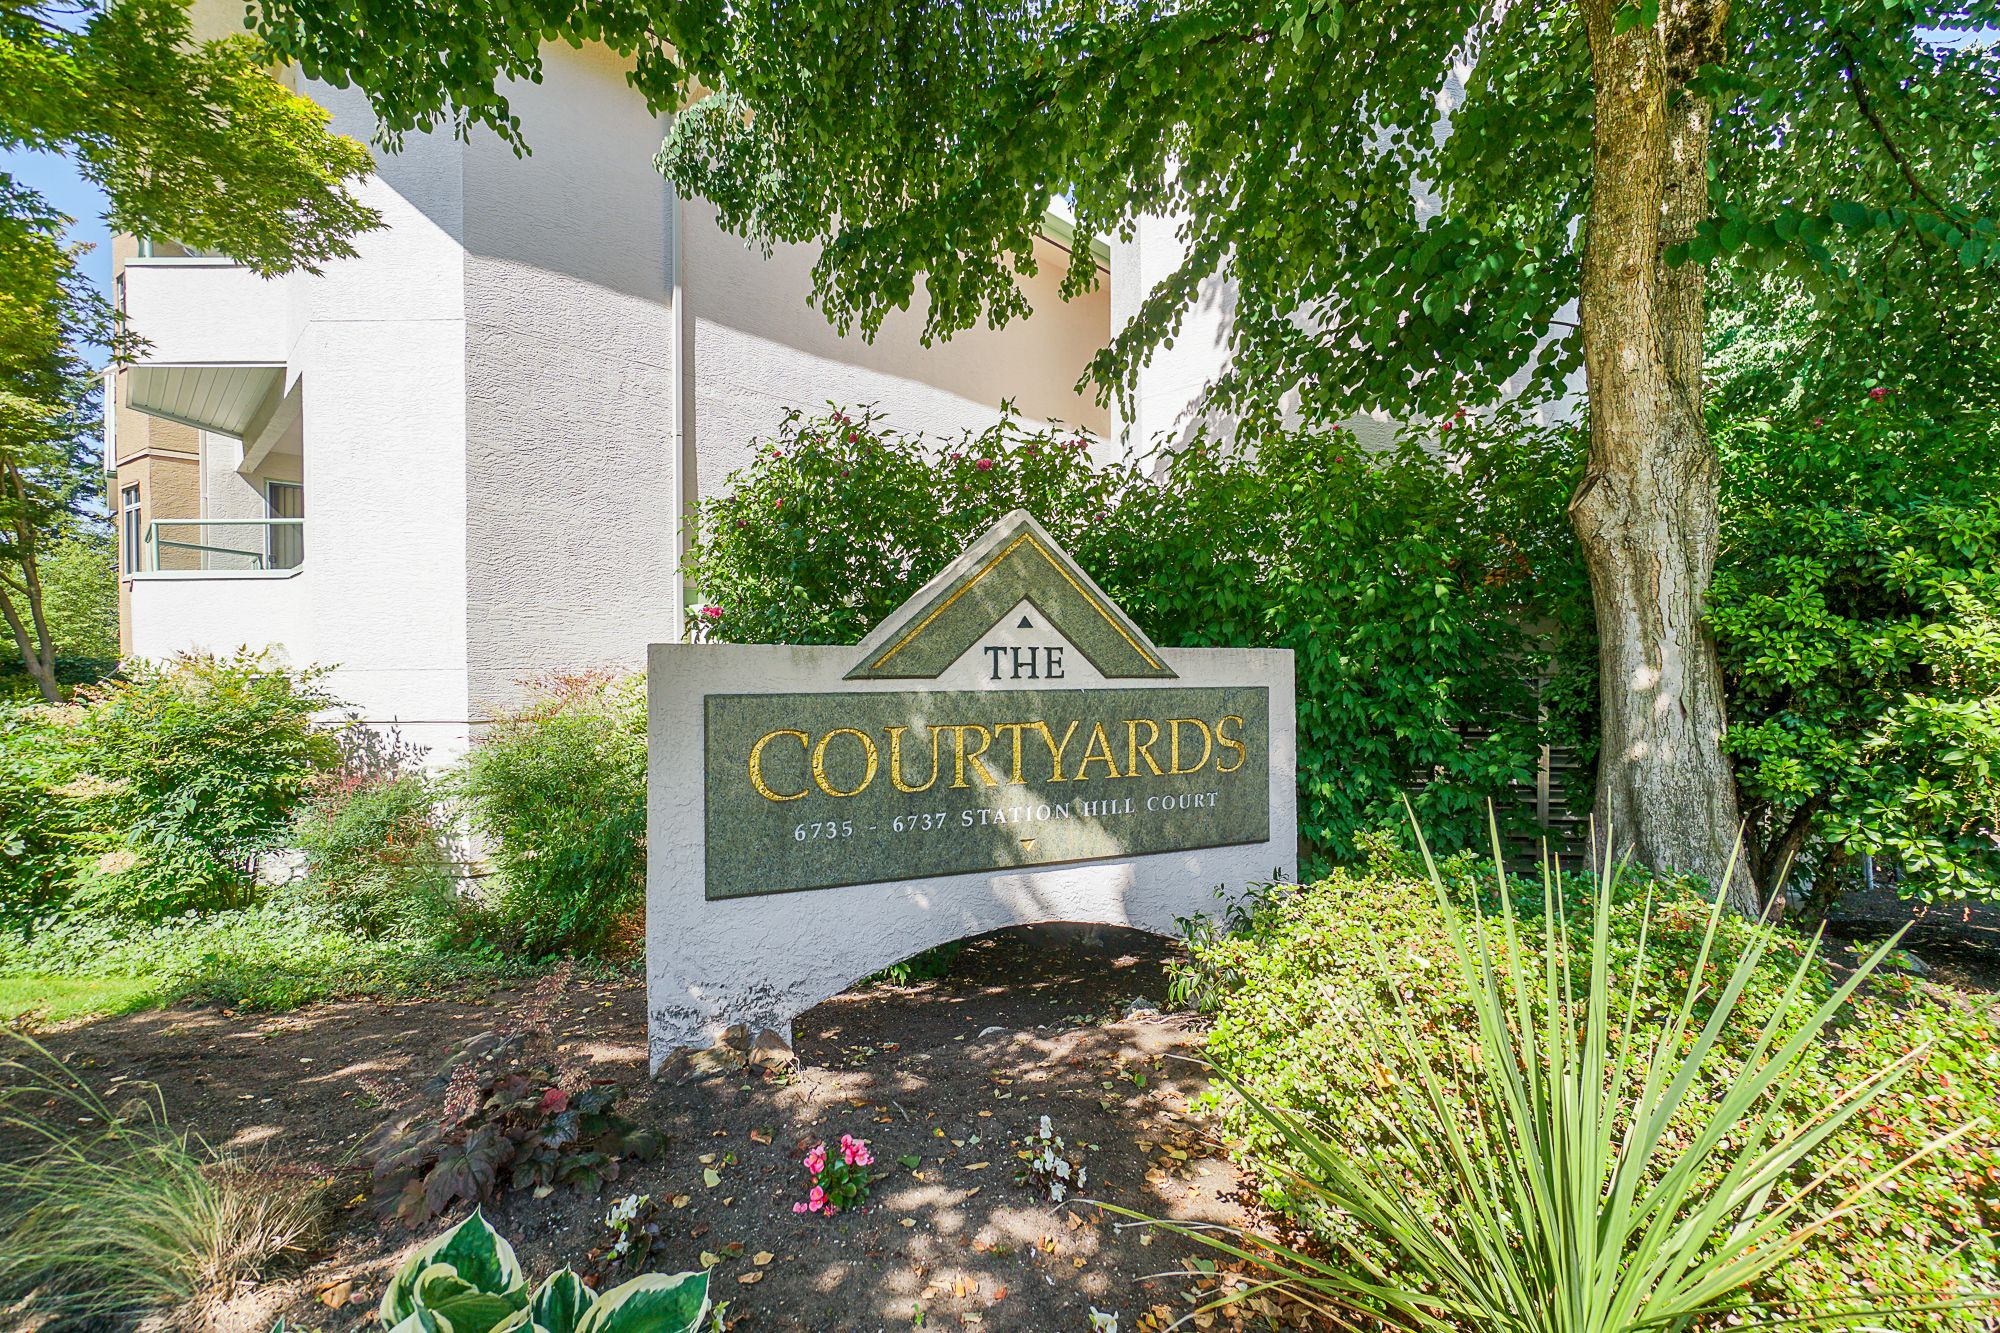 Main Photo: 210 6737 STATION HILL COURT in Burnaby: South Slope Condo for sale (Burnaby South)  : MLS®# R2460243